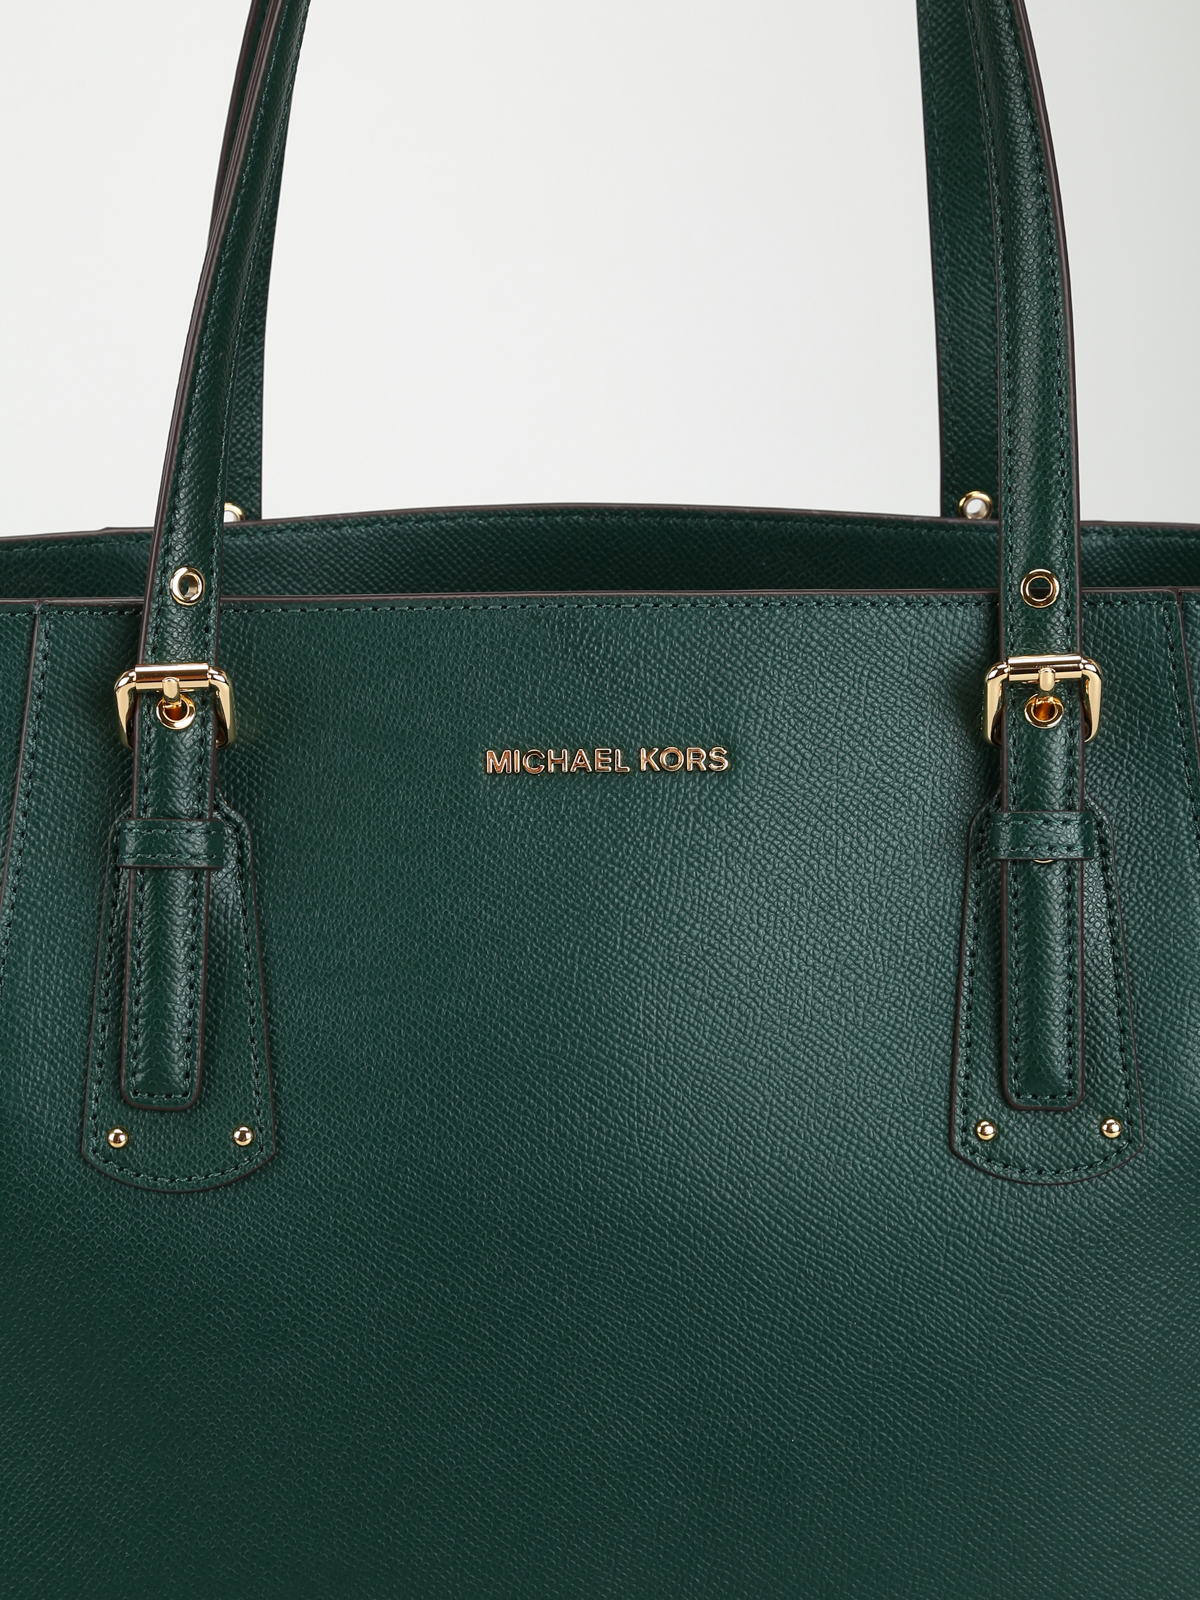 green grainy leather bag - totes bags 